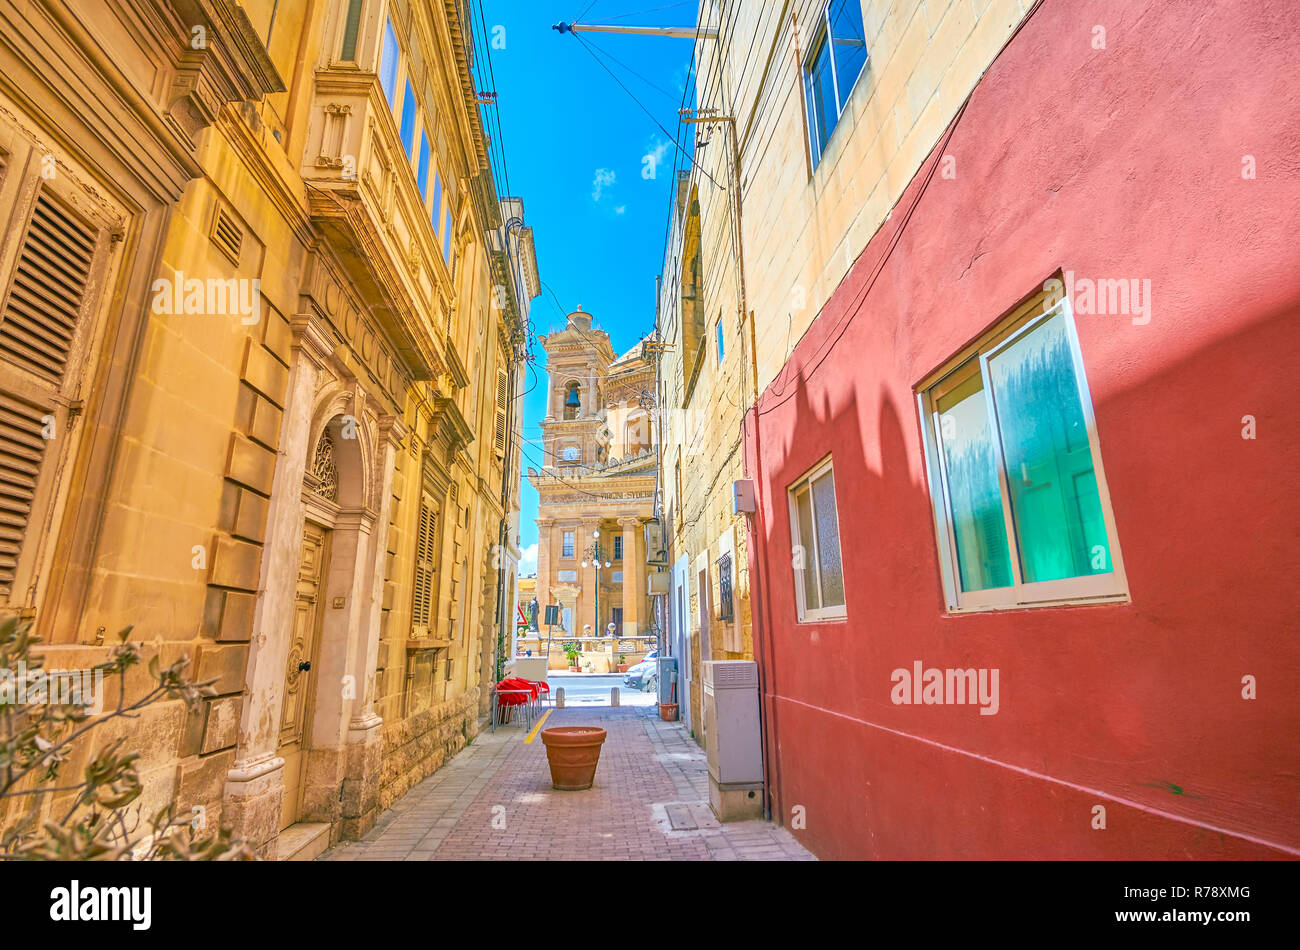 The small town Mosta in the middle of the island boasts cozy narrow streets, typical Maltese houses and huge Basilica Rotunda in the town's center. Stock Photo